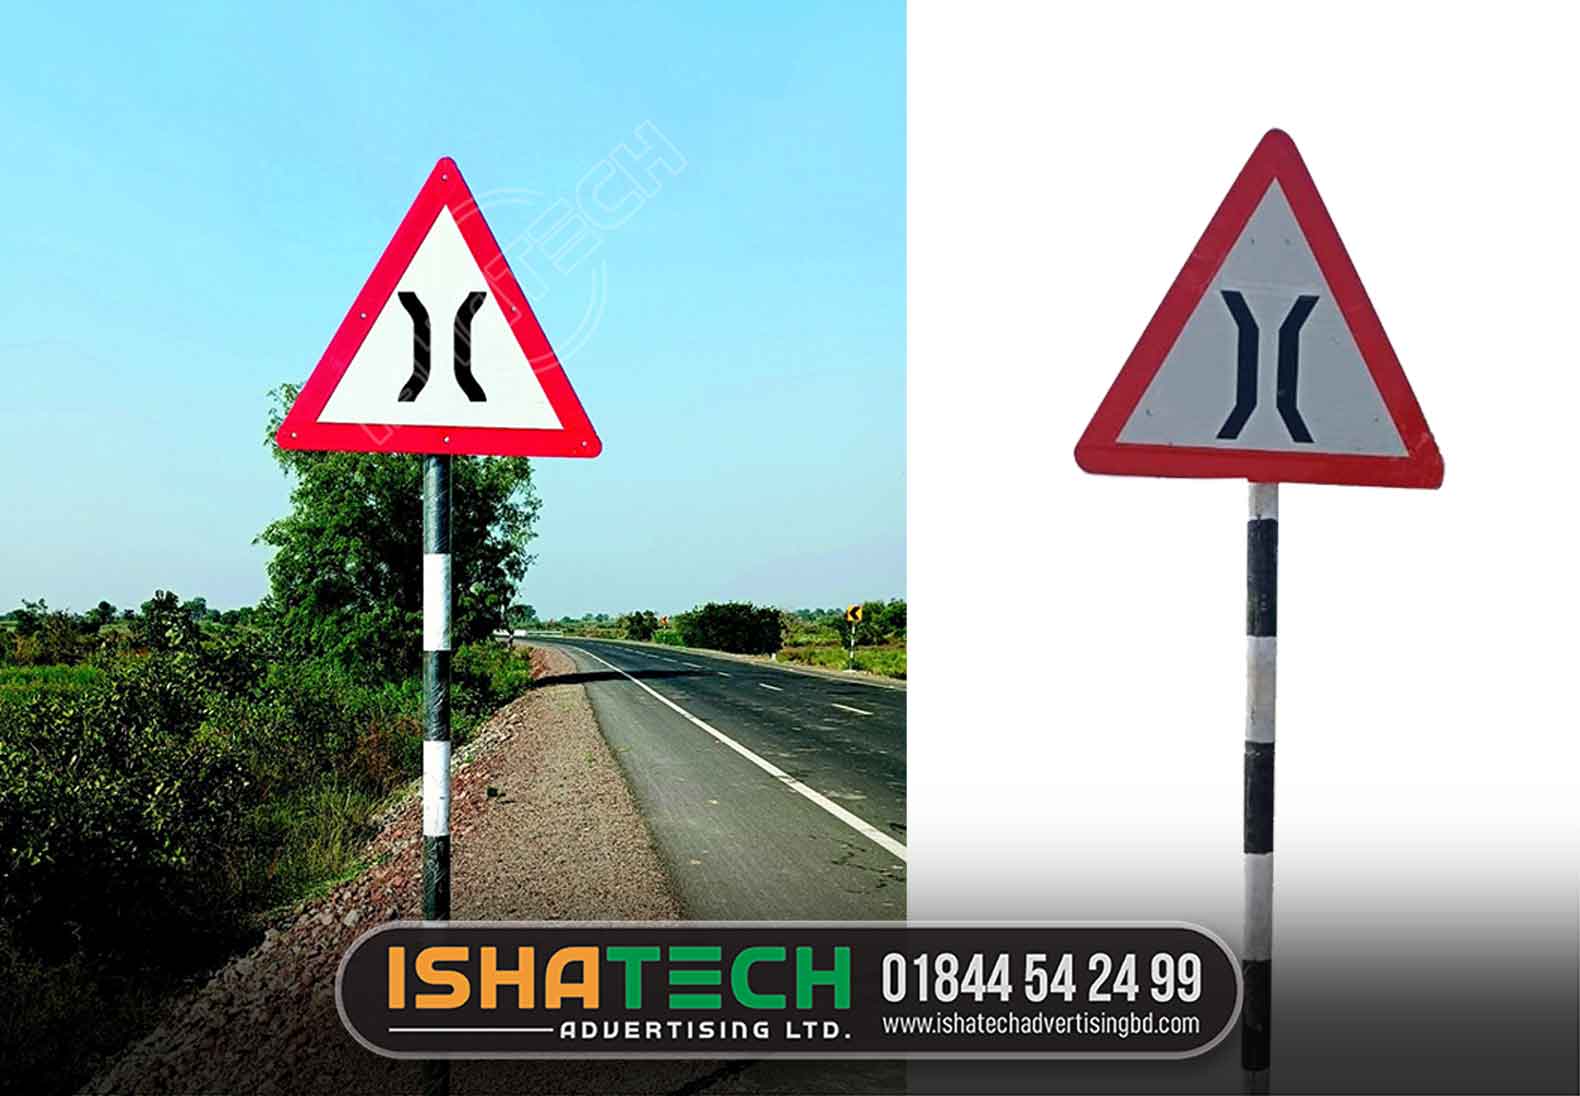 White Aluminium Right Hair Pin Bend Cautionary Retro Reflective Road Signage, Thickness: 3mm